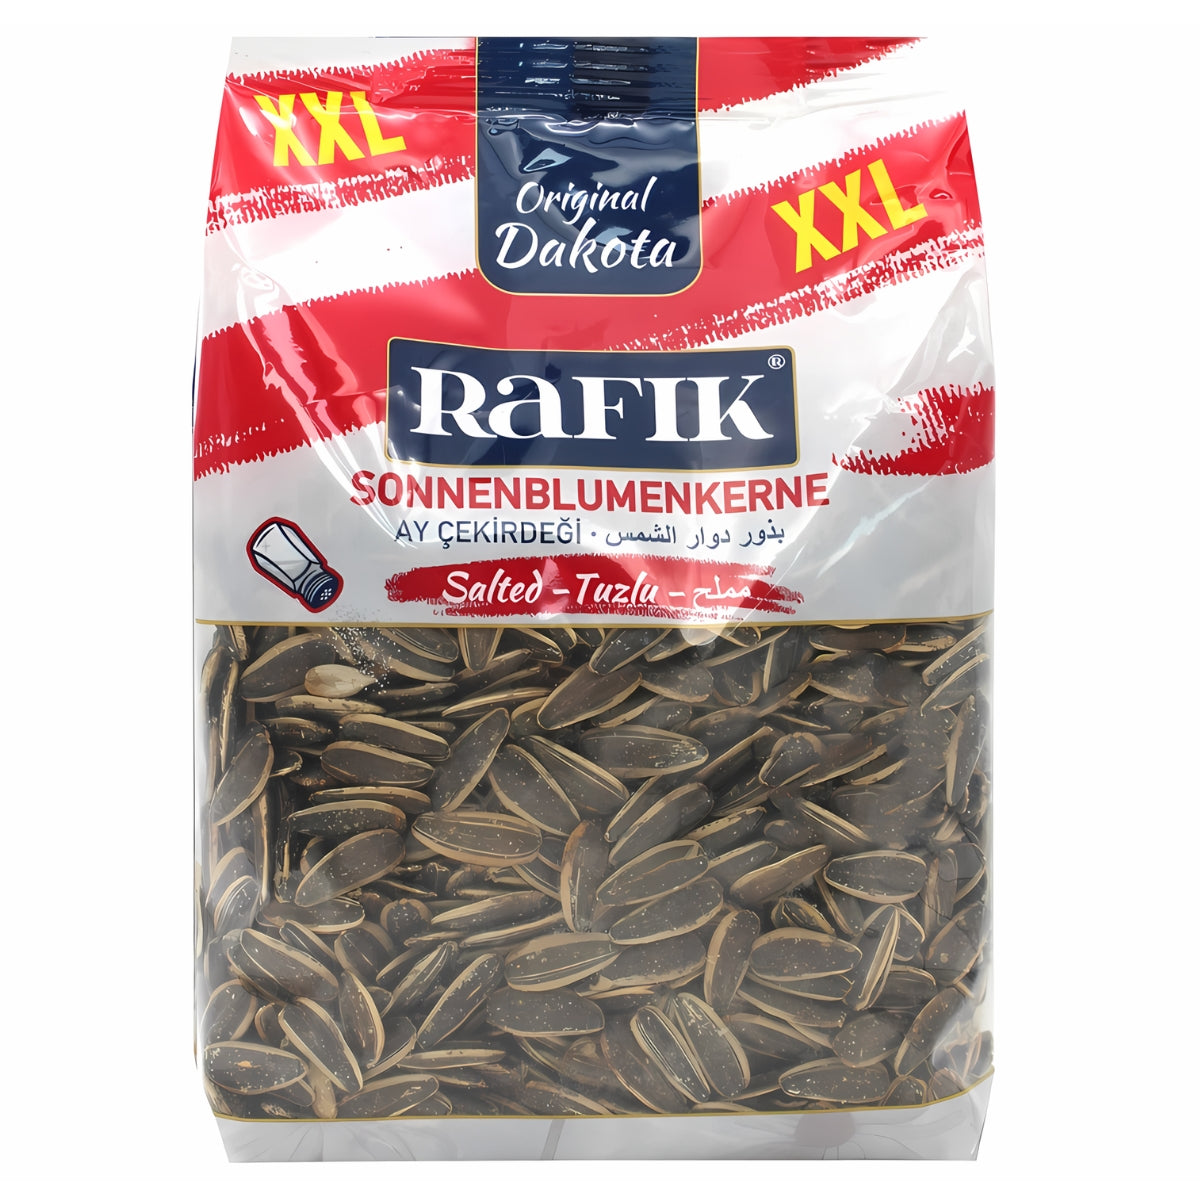 A package of Rafik - Salted Sunflower Seeds Original Dakota - 400g labeled "Original Dakota" and "XXL". The bag features a clear section displaying the seeds and text in multiple languages.